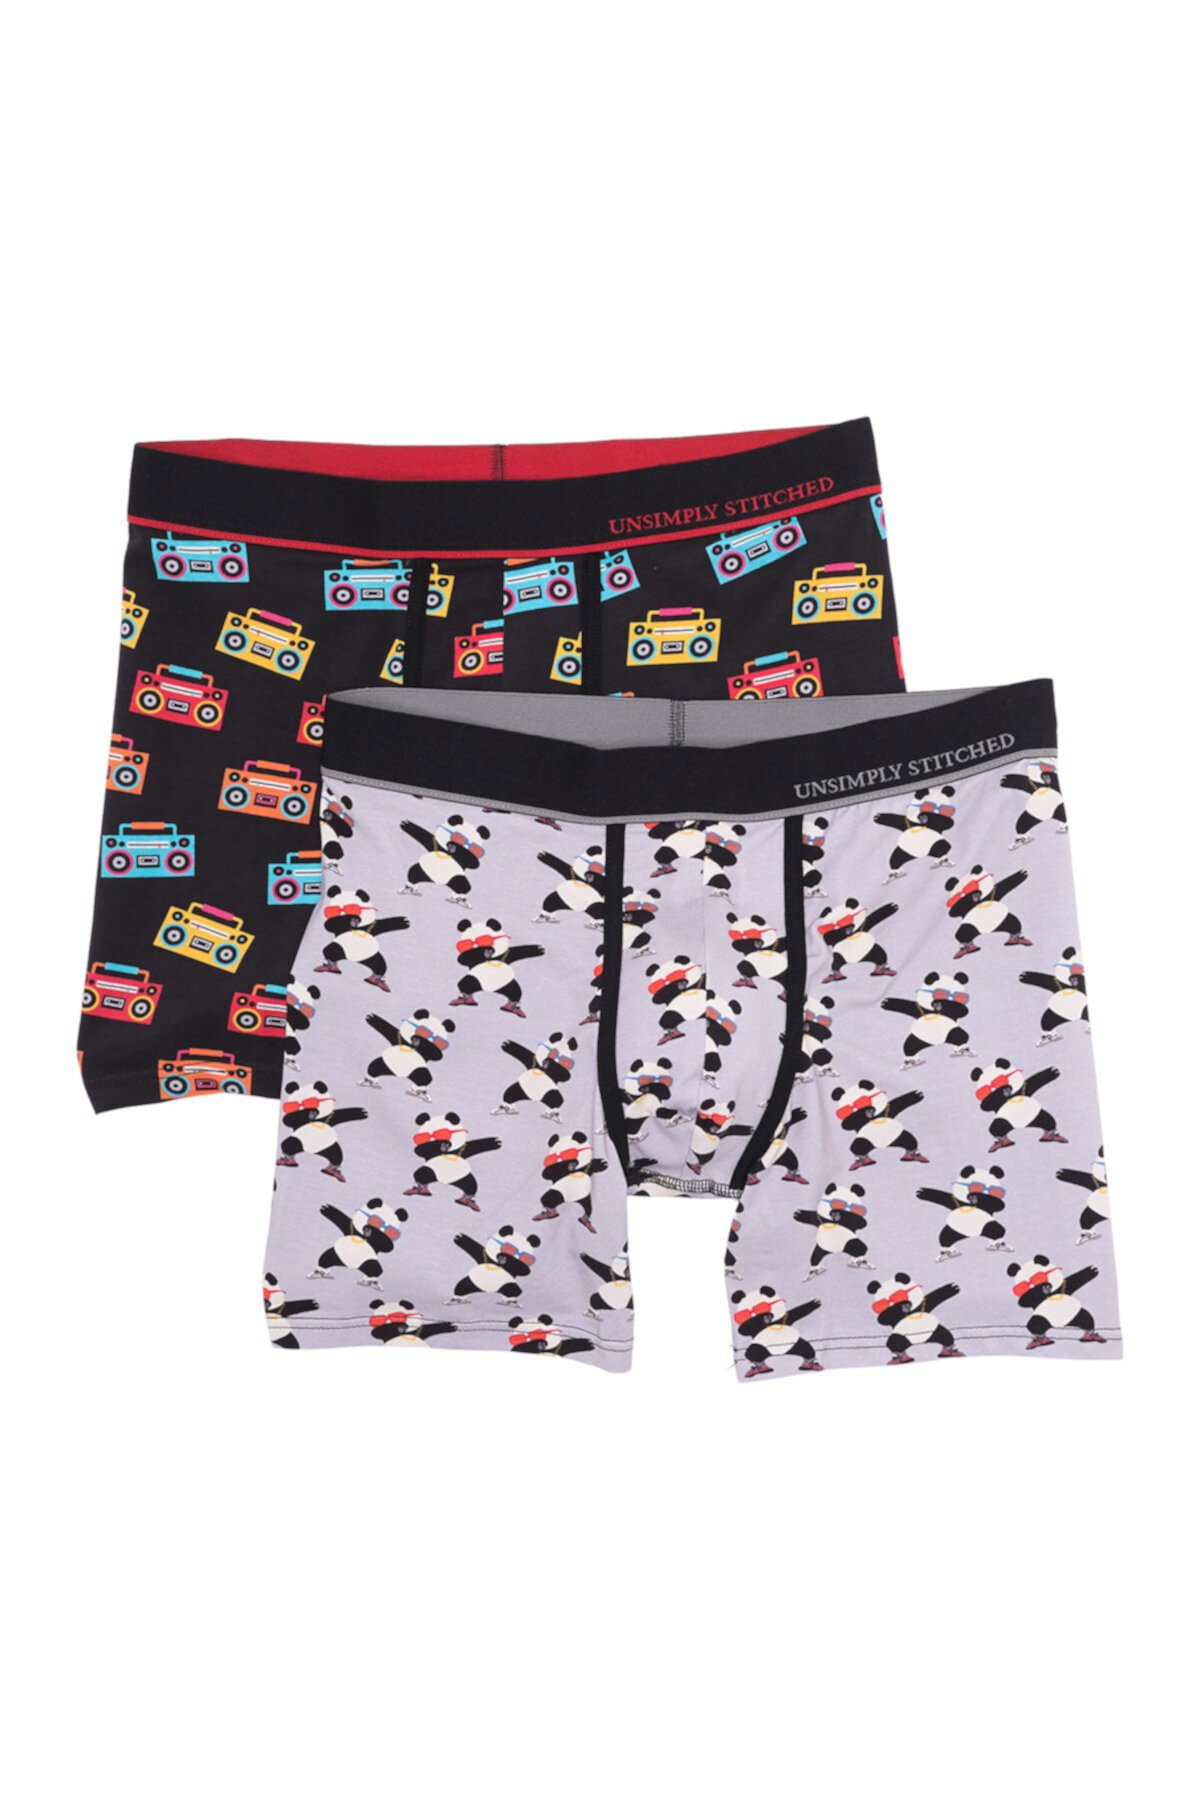 Printed Boxer Briefs - Pack of 2 Unsimply Stitched